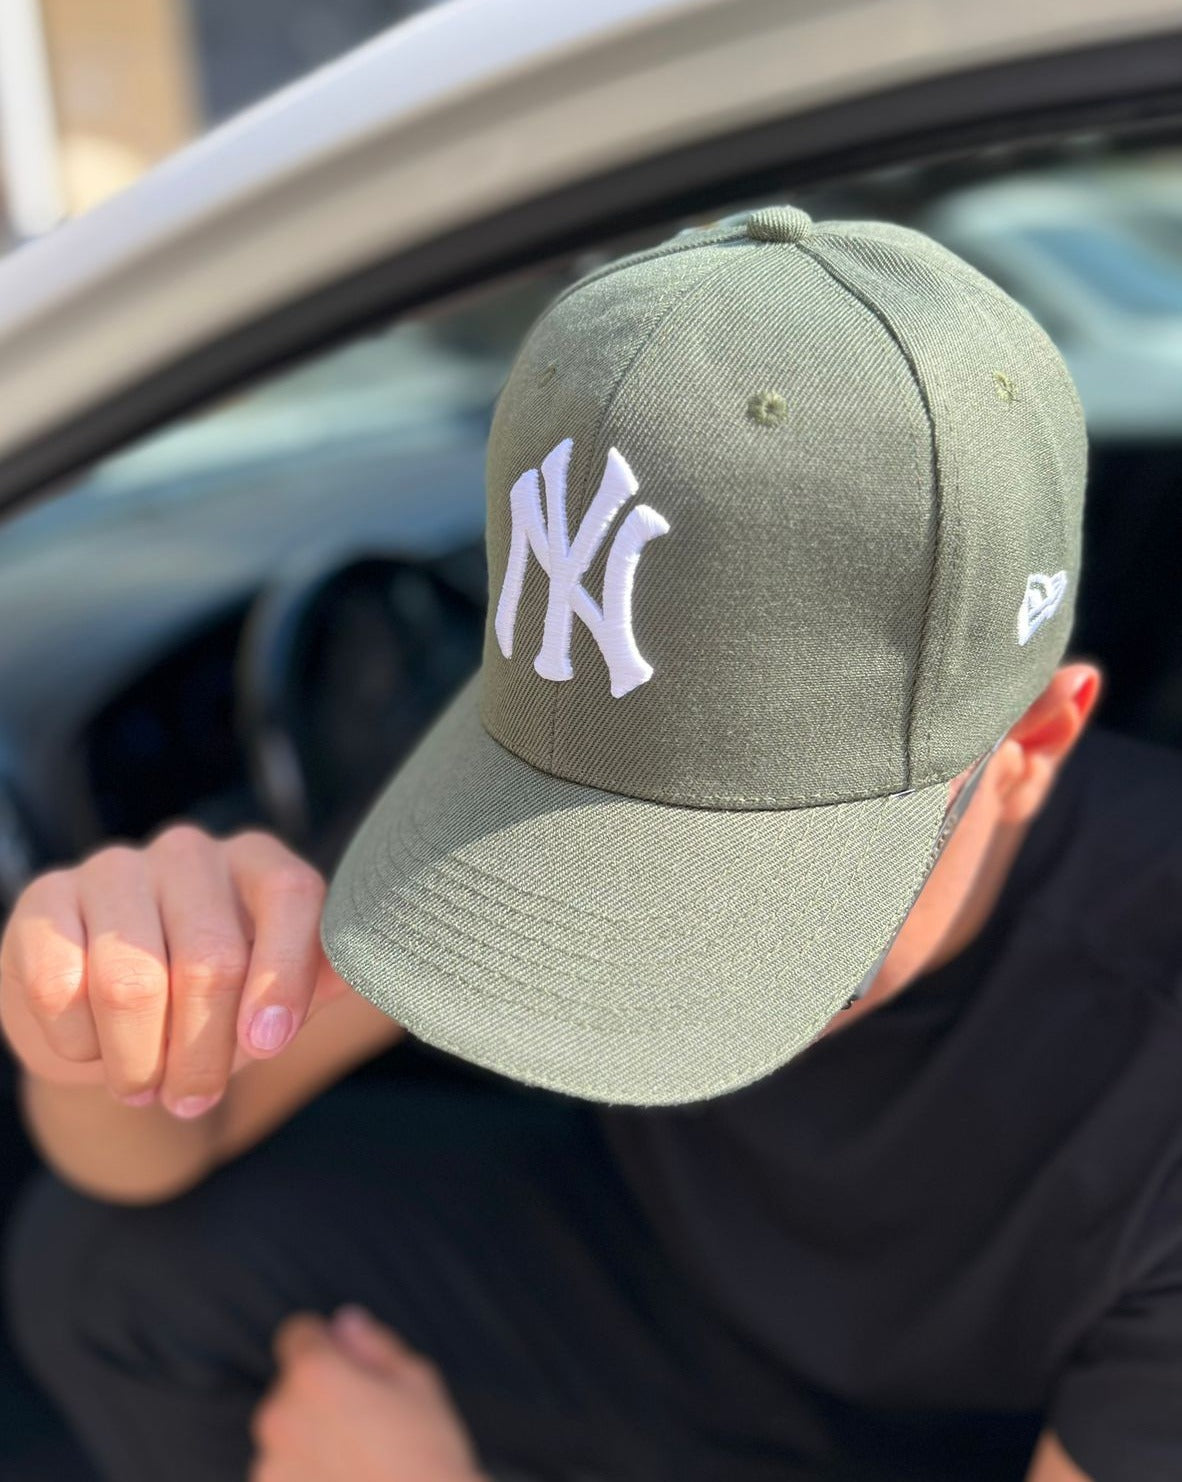 NY CAPS UNISEX MILITARY GREEN WHITE LETTERS